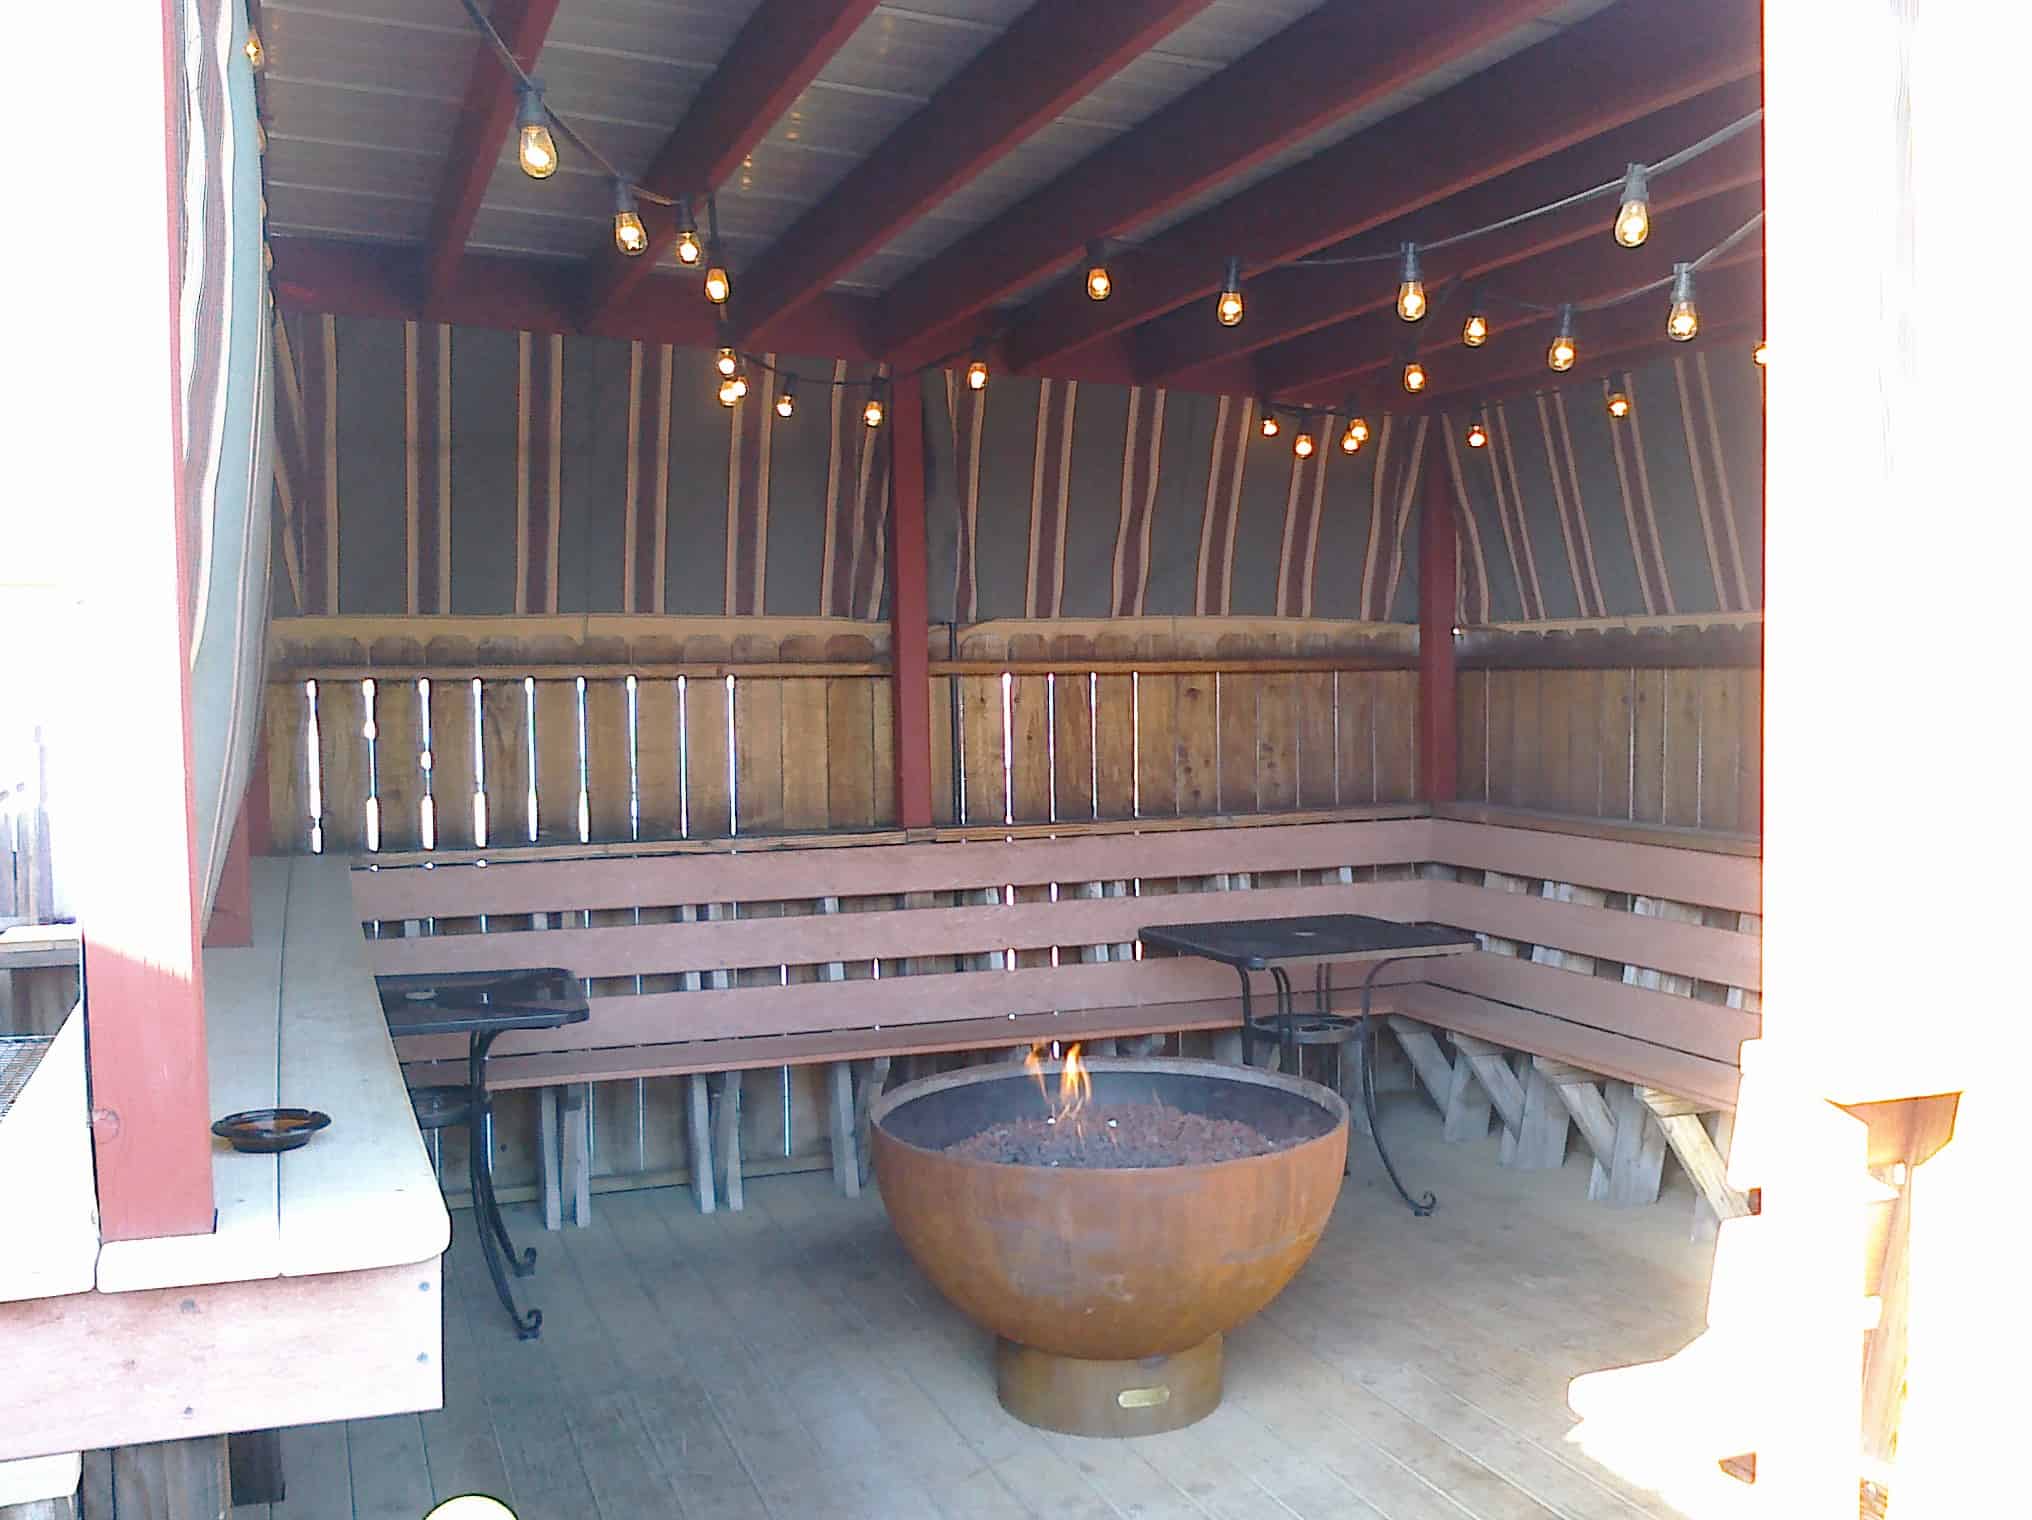 Covered Patio With A Fire Pit Things, Are Propane Fire Pits Safe On Covered Decks